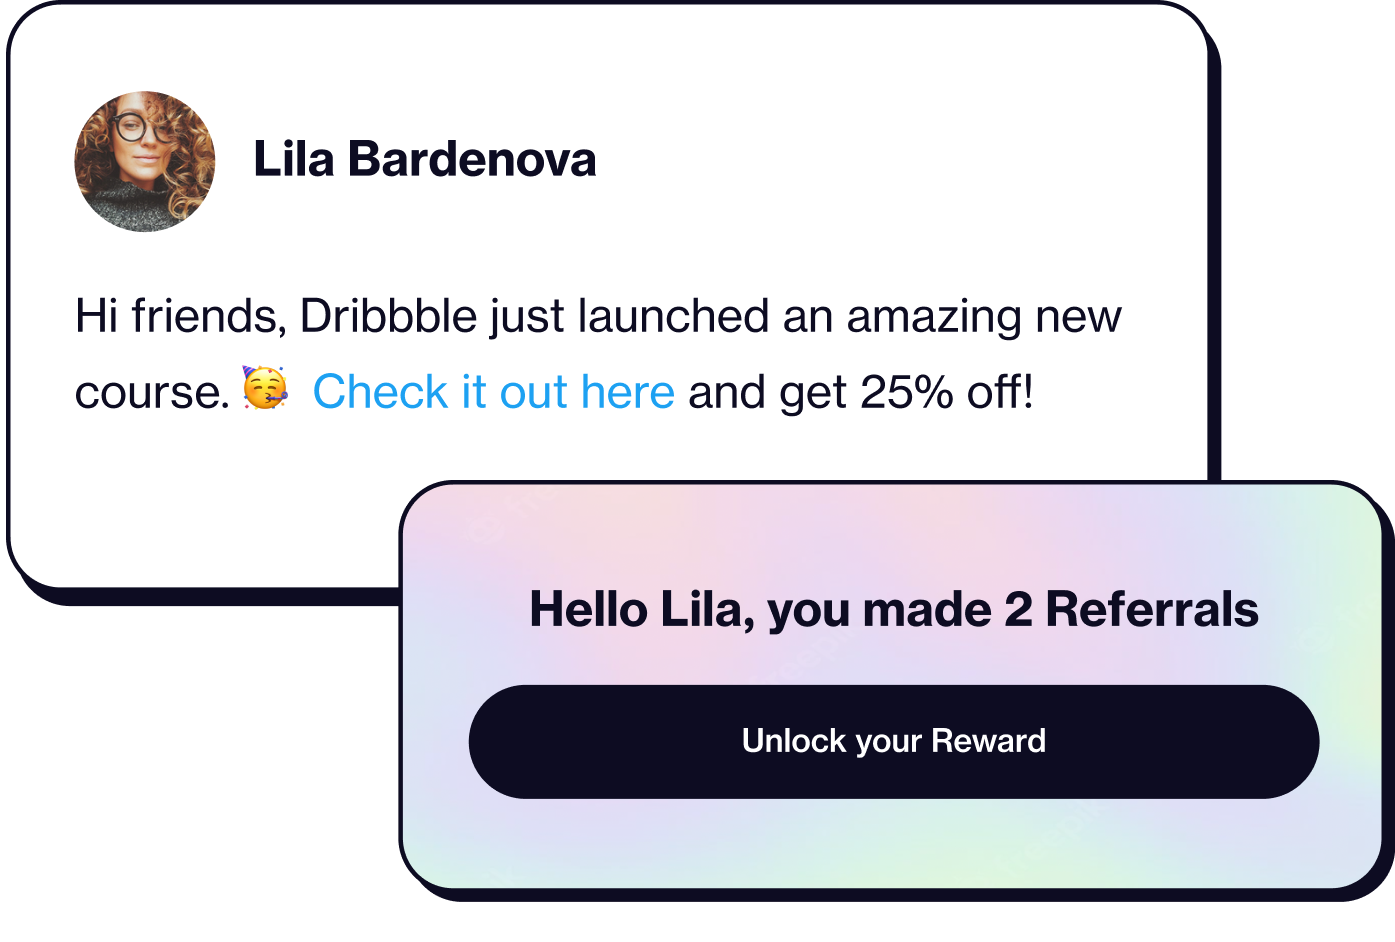 Tweet reads "Hi friends, Dribbble just launched an amazing new course. Check it out and get 25% off! Notification that she made 2 referrals and can Unlock your Reward.